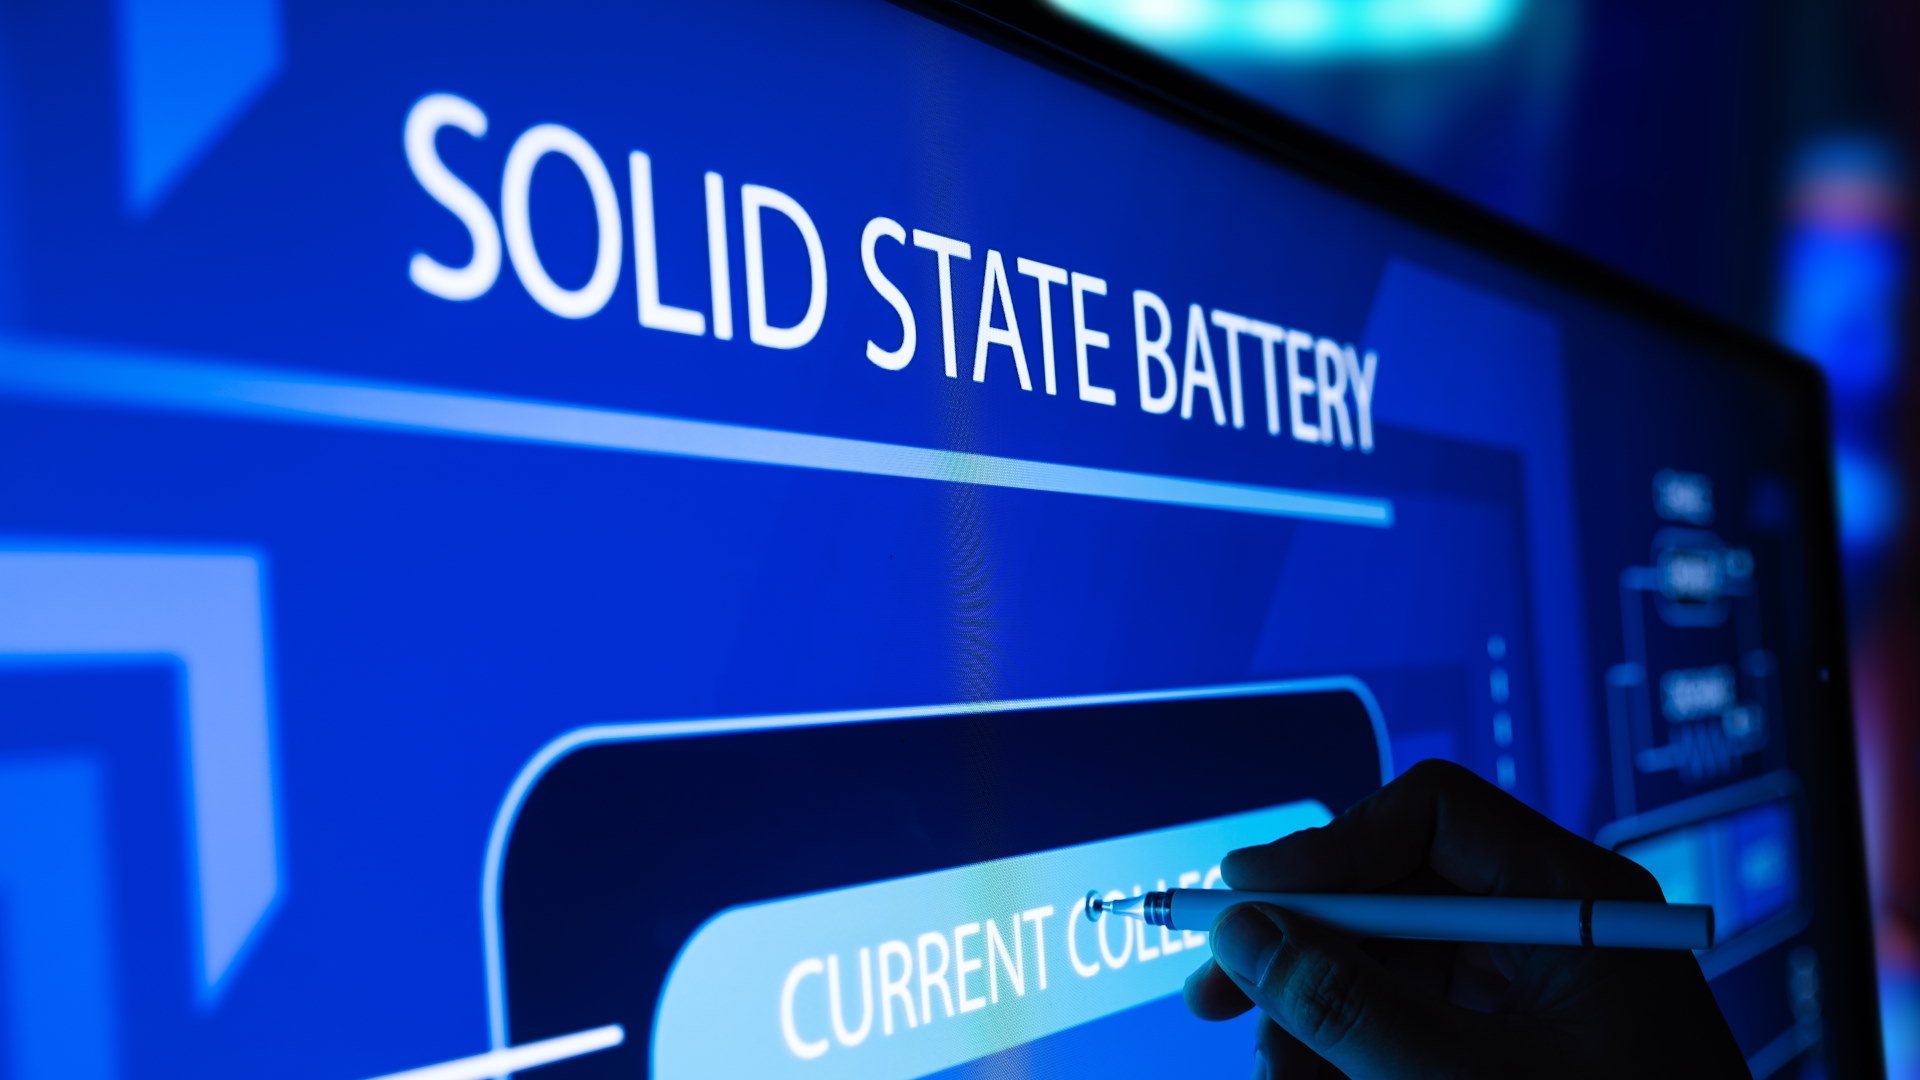 German startup HBP has developed its solid state batteries, already ready for production